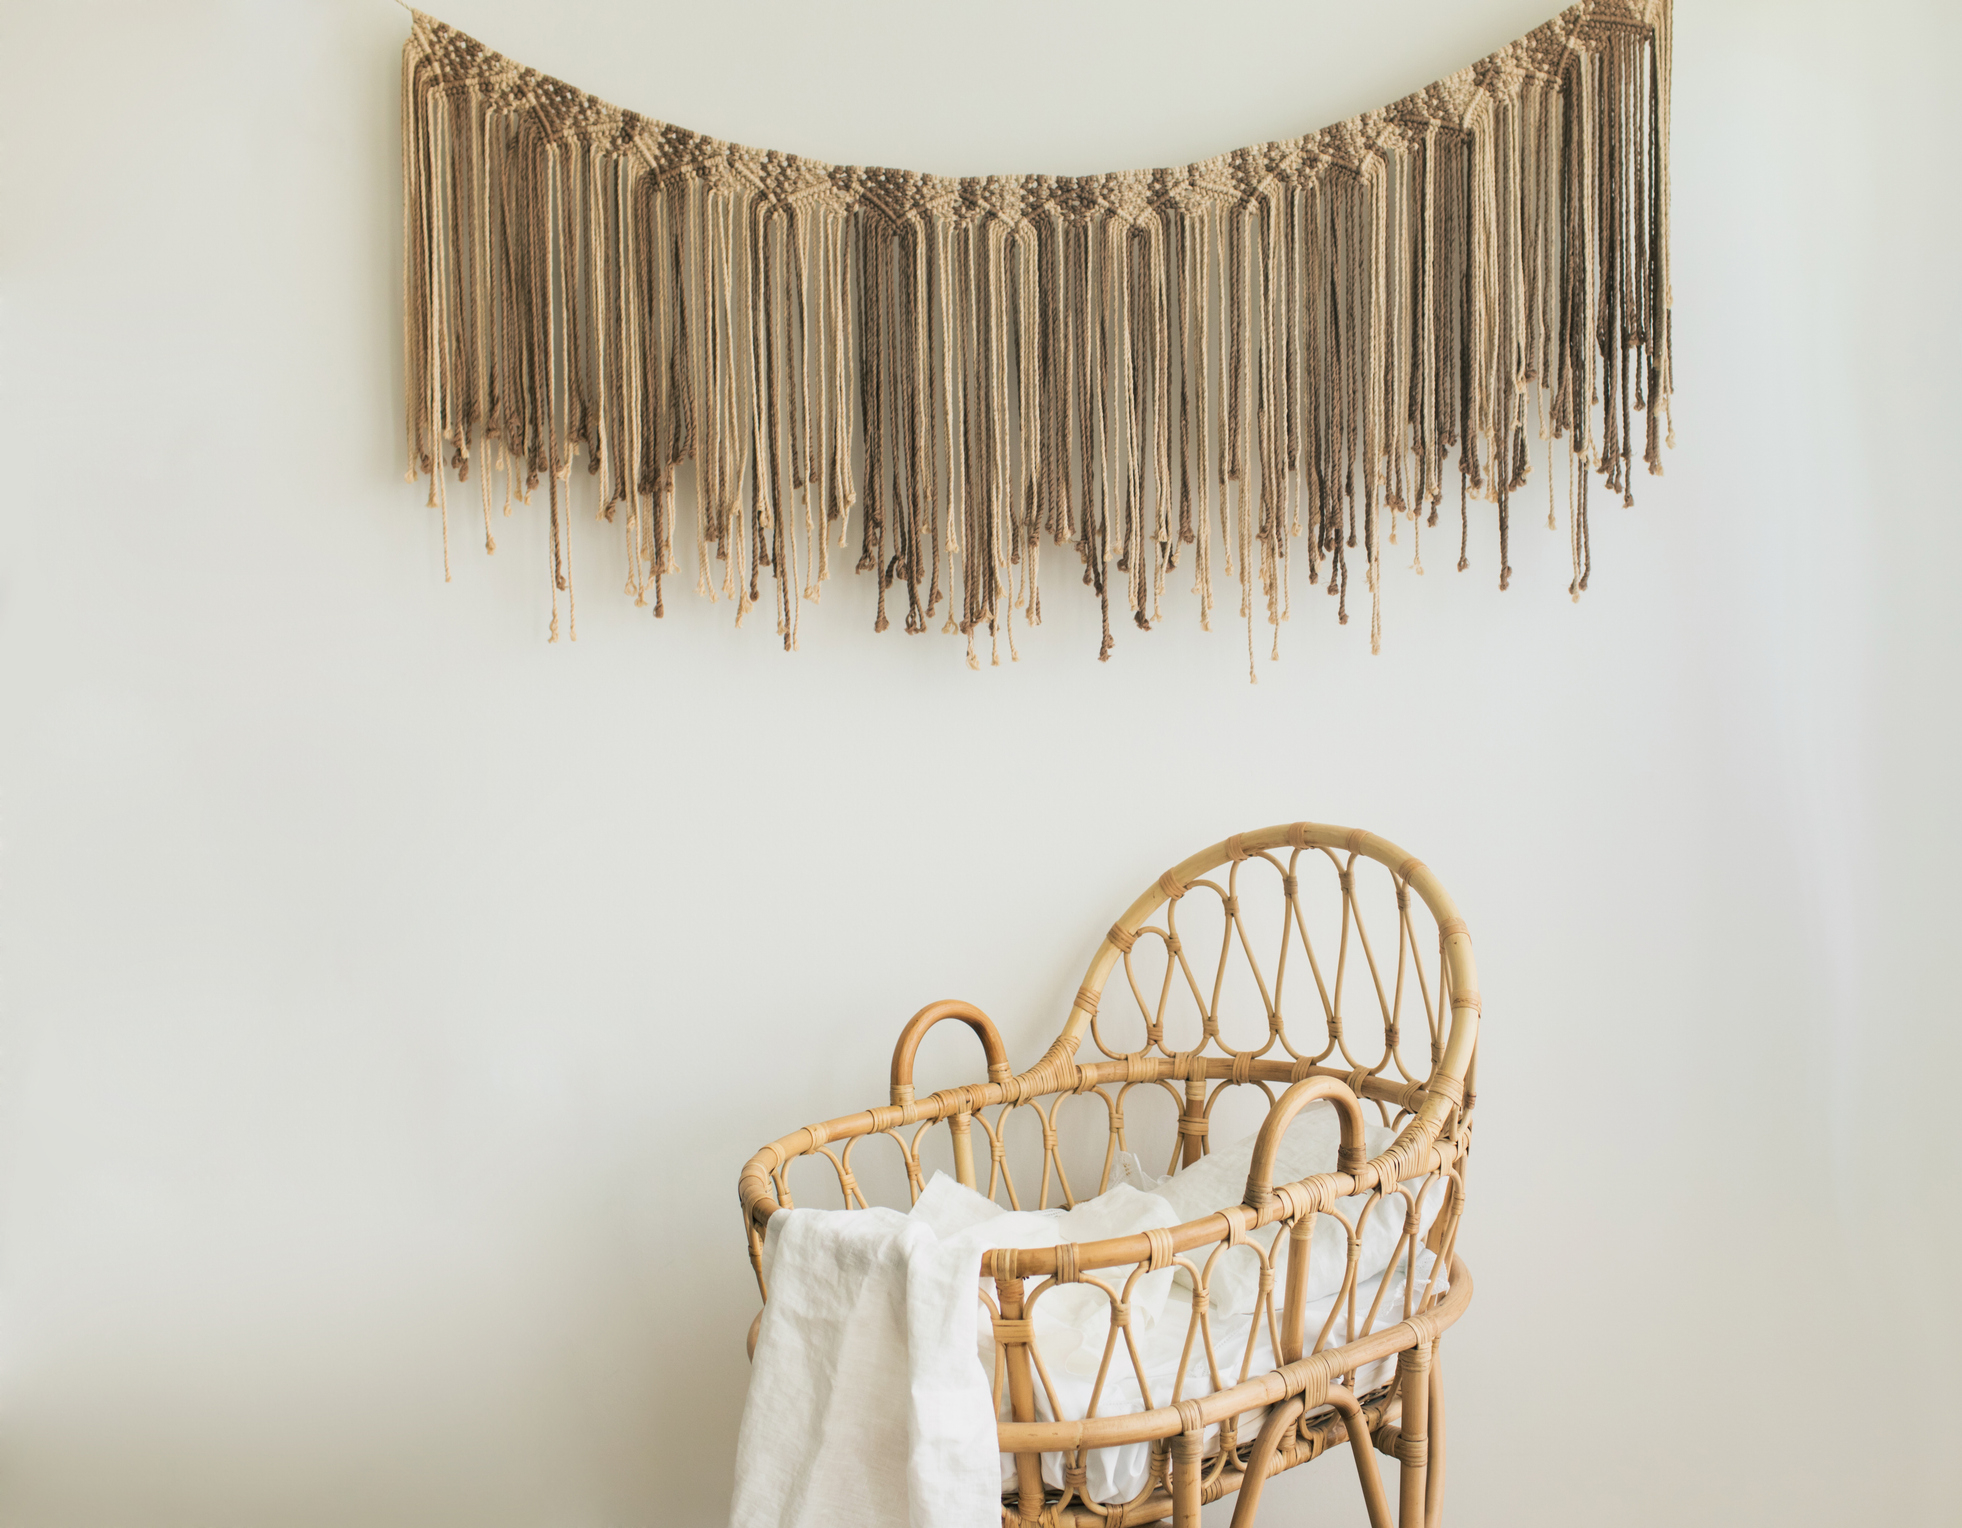 Woven wall hanging above a wicker bassinet with a blanket, in a nursery setting